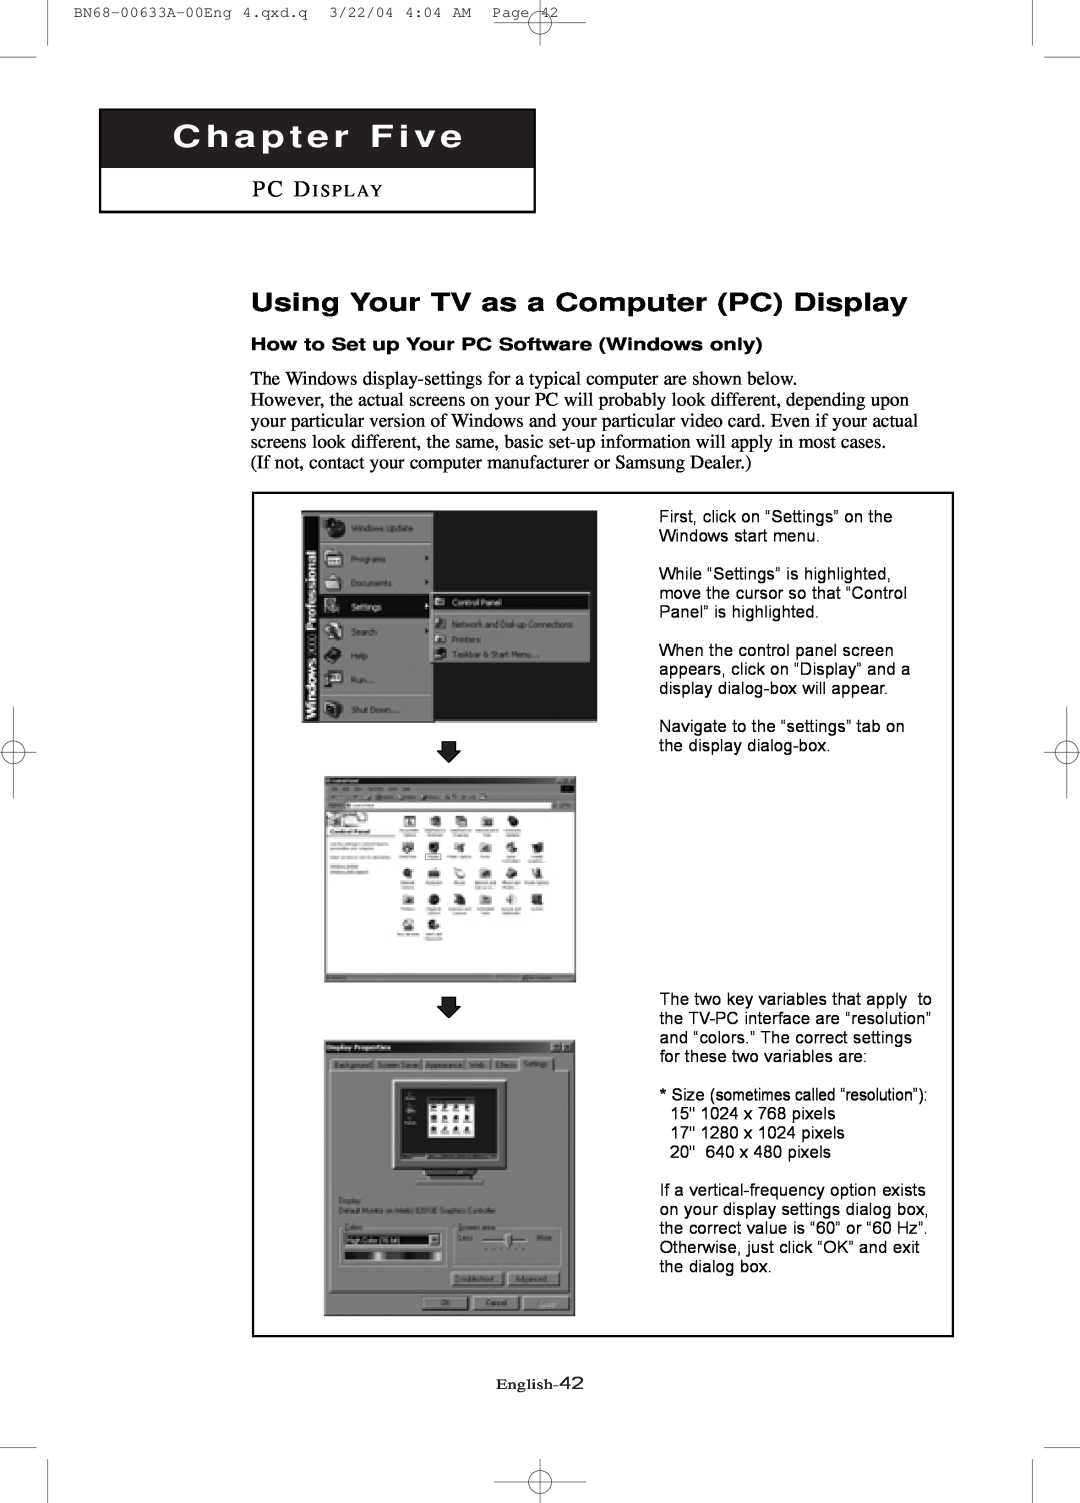 Samsung LT-P 1745, LT-P 1545, LT-P 2045 manual Chapter Five, Using Your TV as a Computer PC Display 